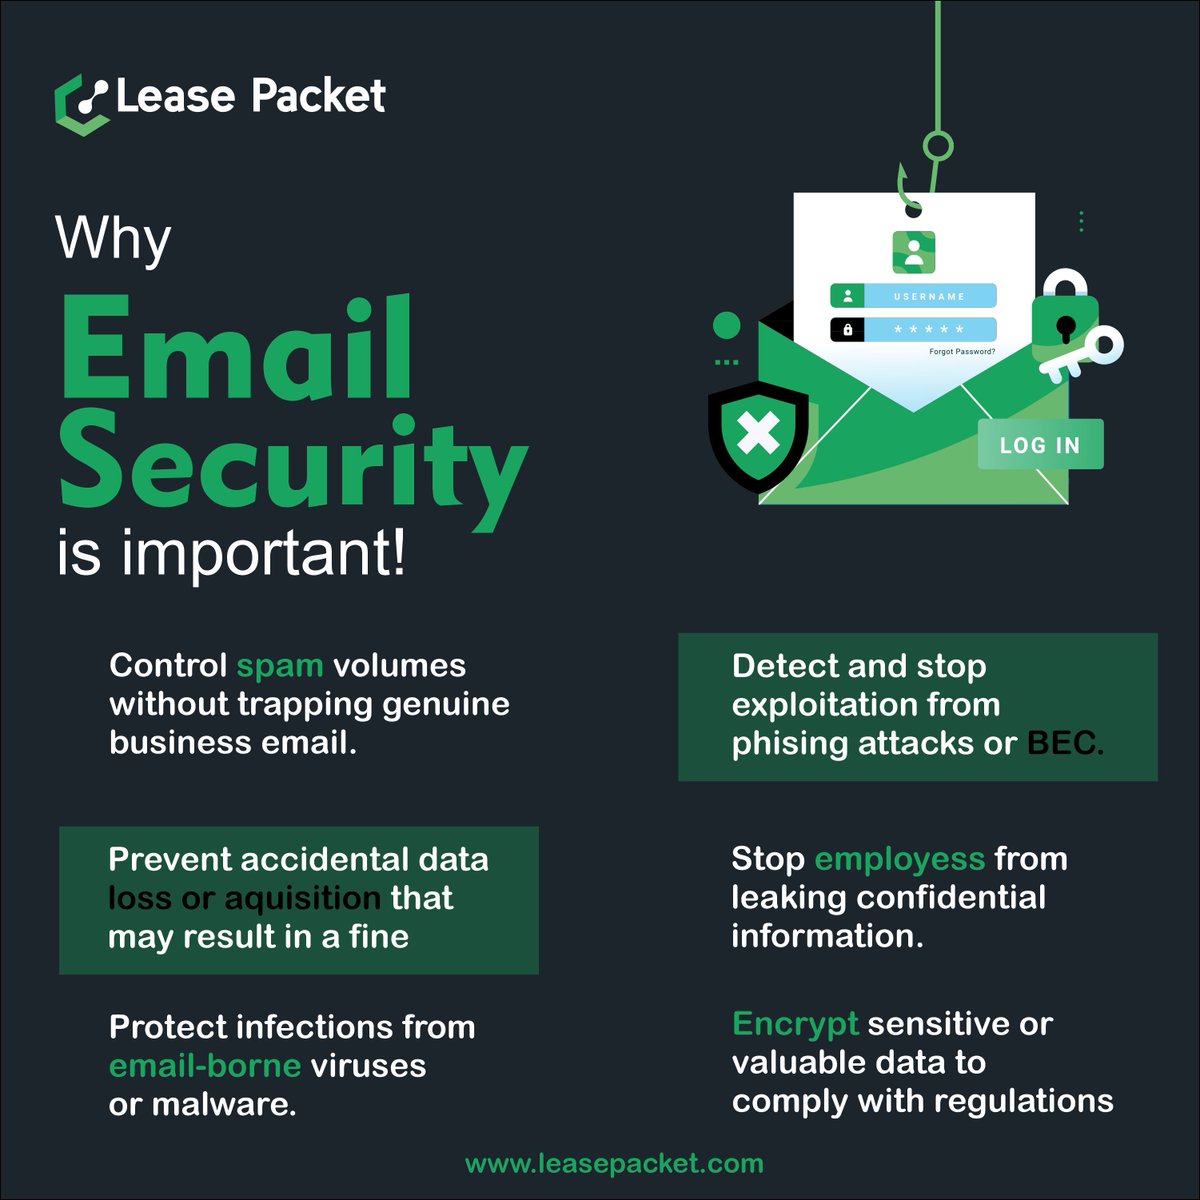 Why is Email Security Important: Protect your communications with Lease Packet's secure email solutions. Don't let cyber threats compromise your data.
#leasepacket #email #emailsecurity #mailsecurity #serversecurity #sever #emailhacking  #emailserver #mailserver #serversecurity